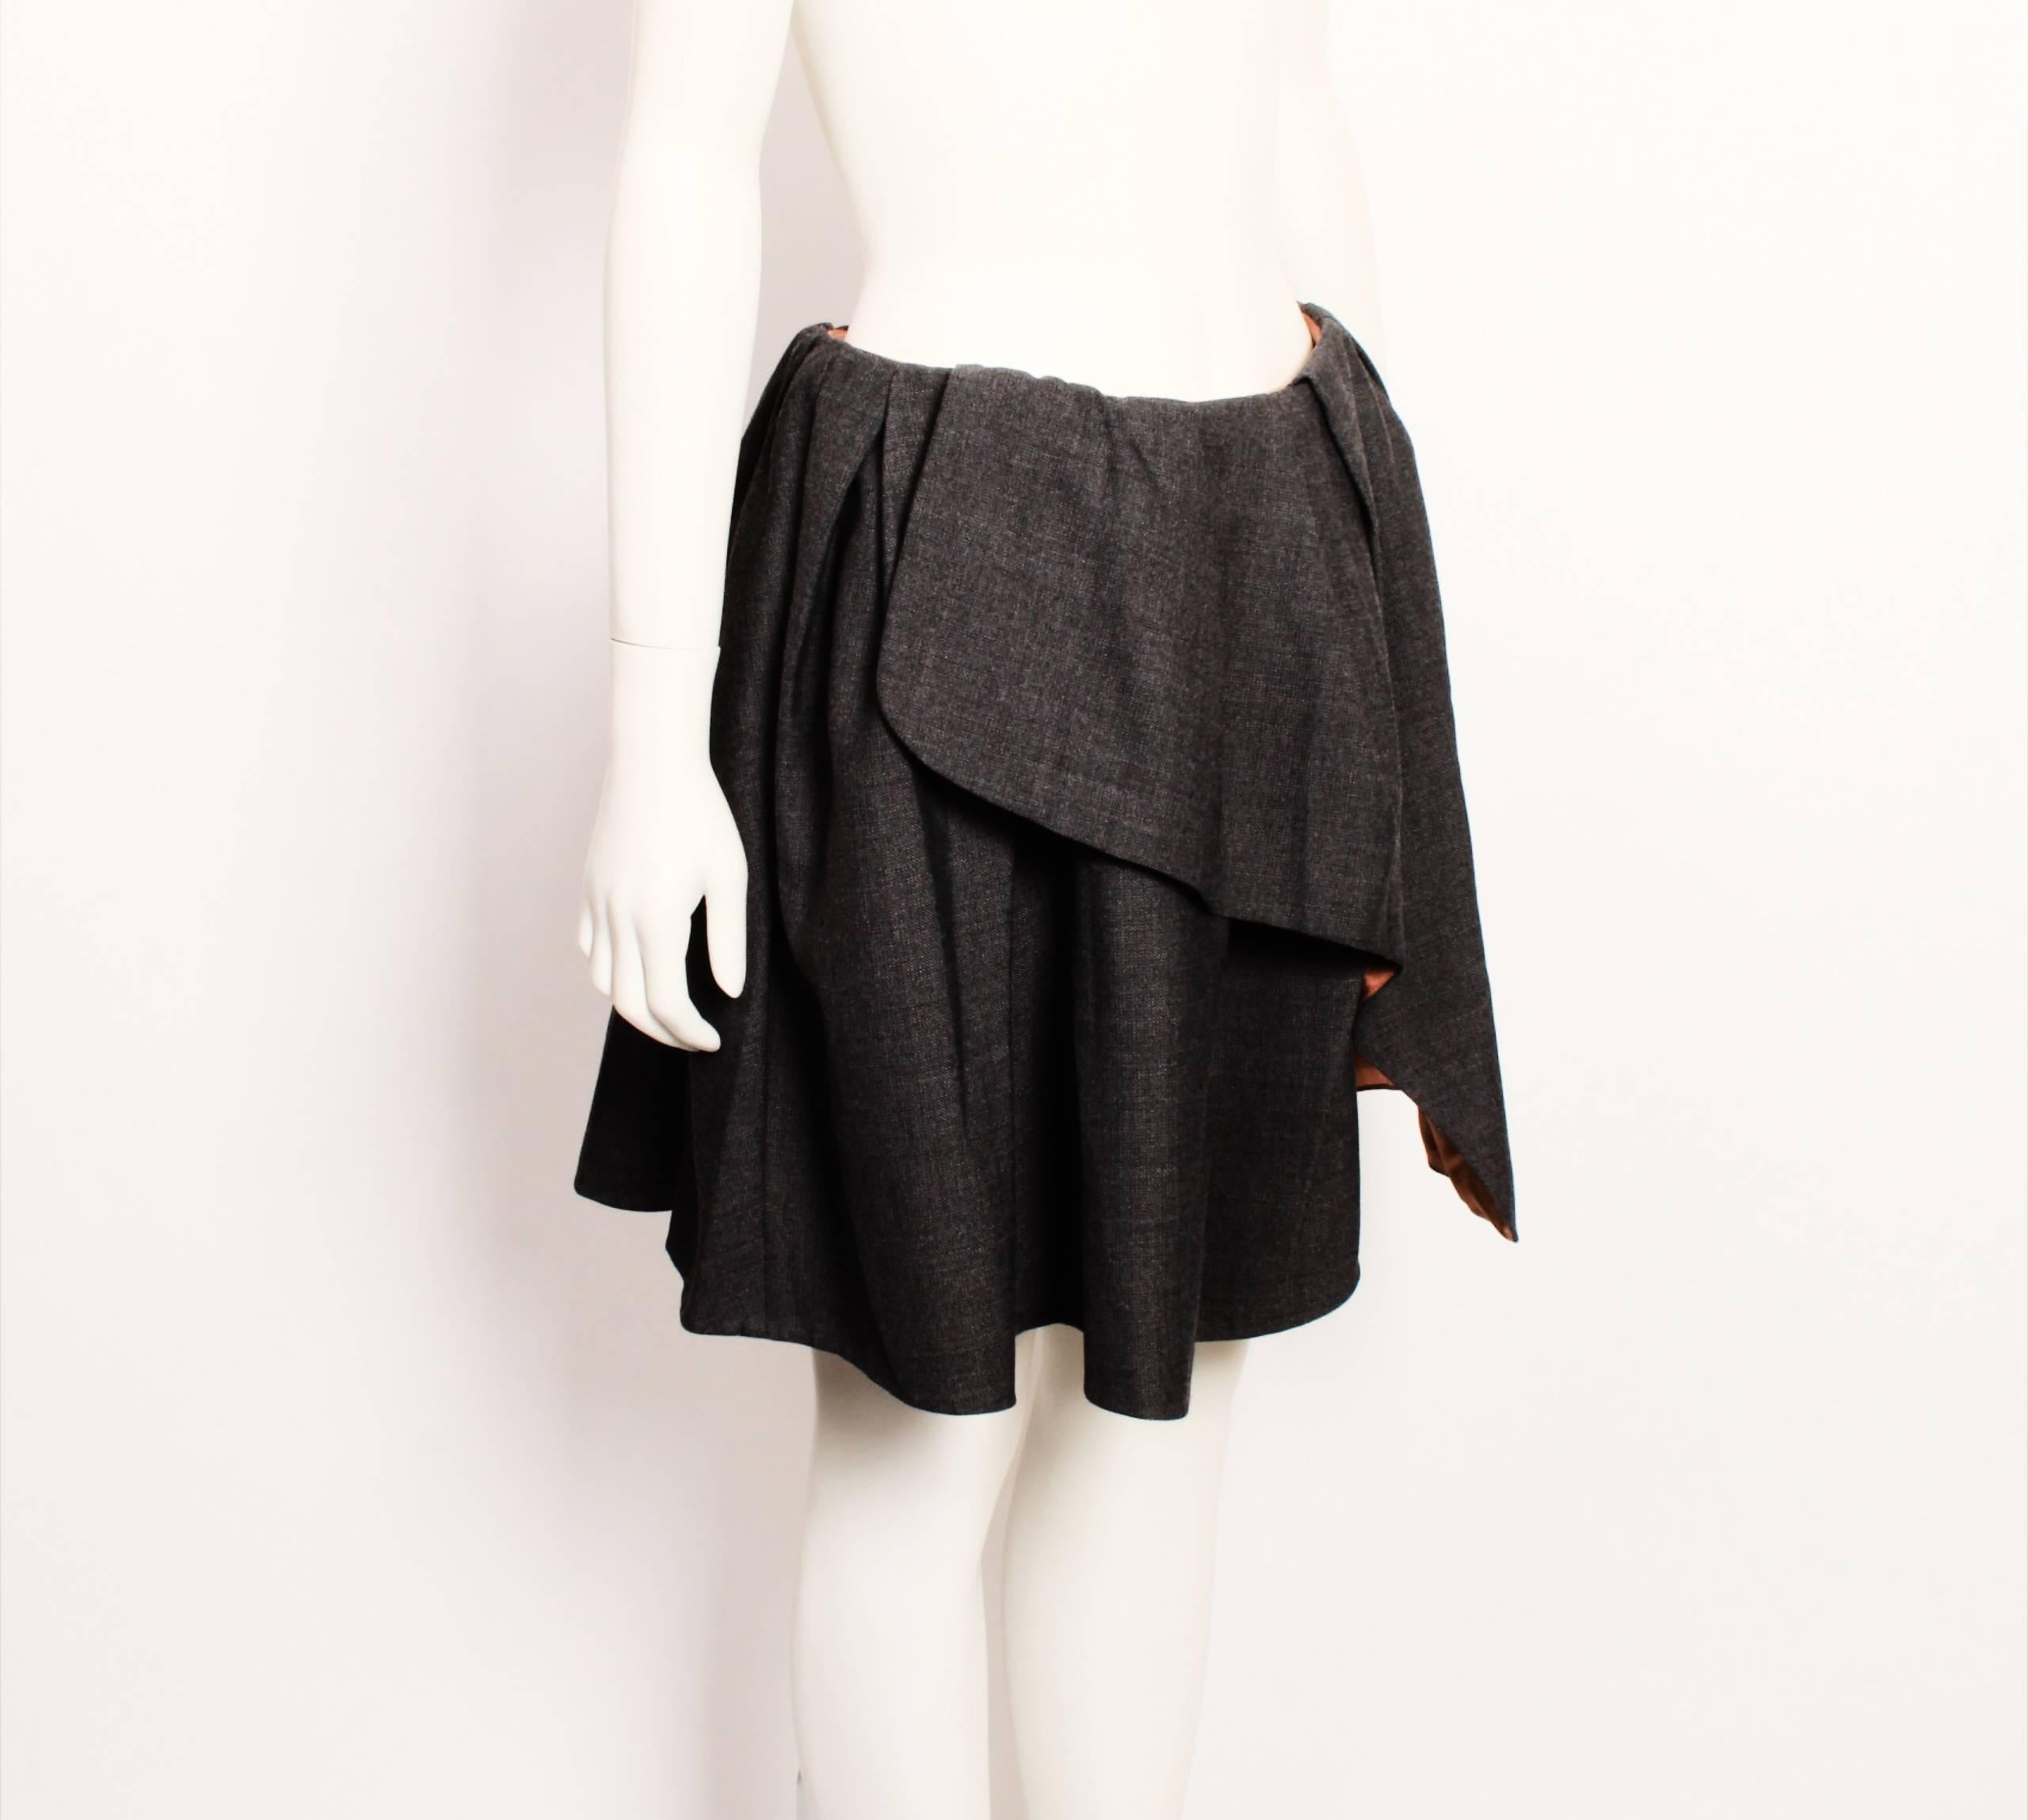 Cute Carven mini skirt in grey wool blend . Features wrap in petal shape panel, pleats, back invisible zipper and lovely toffee coloured lining and grosgrain ribbon waistband. 
